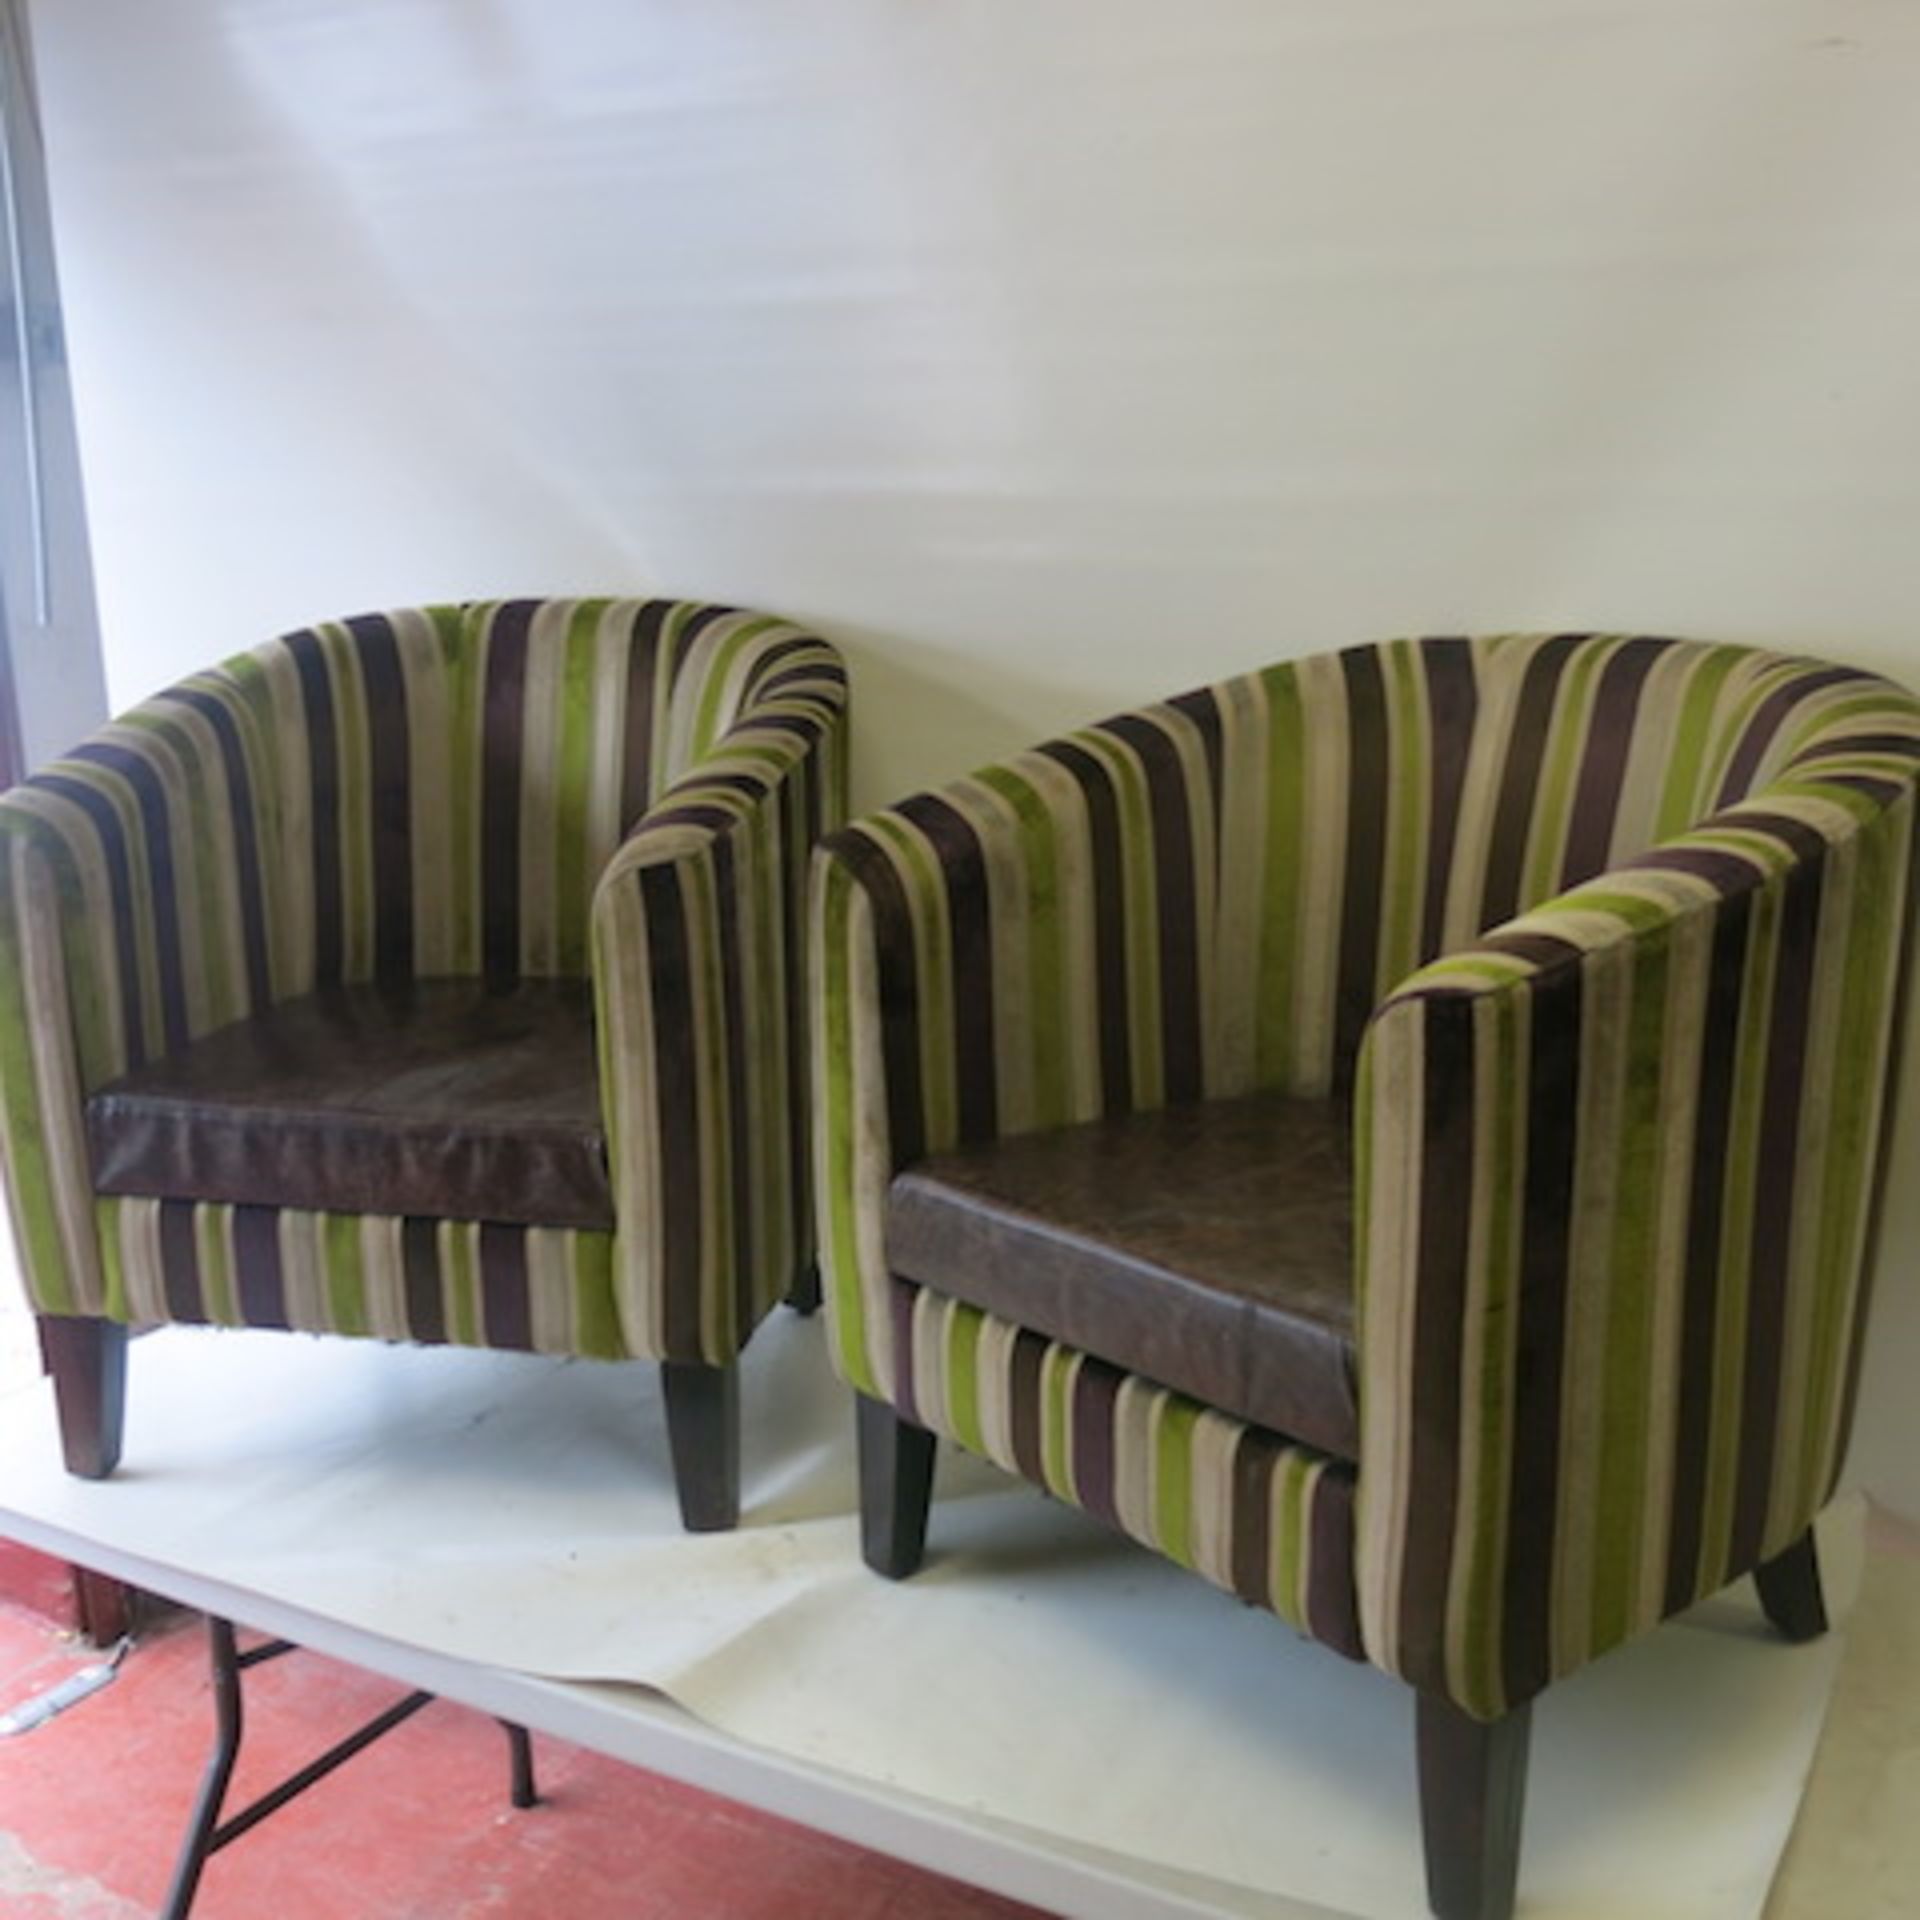 2 x Matching Crushed Velour Tub Chairs with Faux Leather Seat, in Striped Lime/Purple & Beige - Image 2 of 6